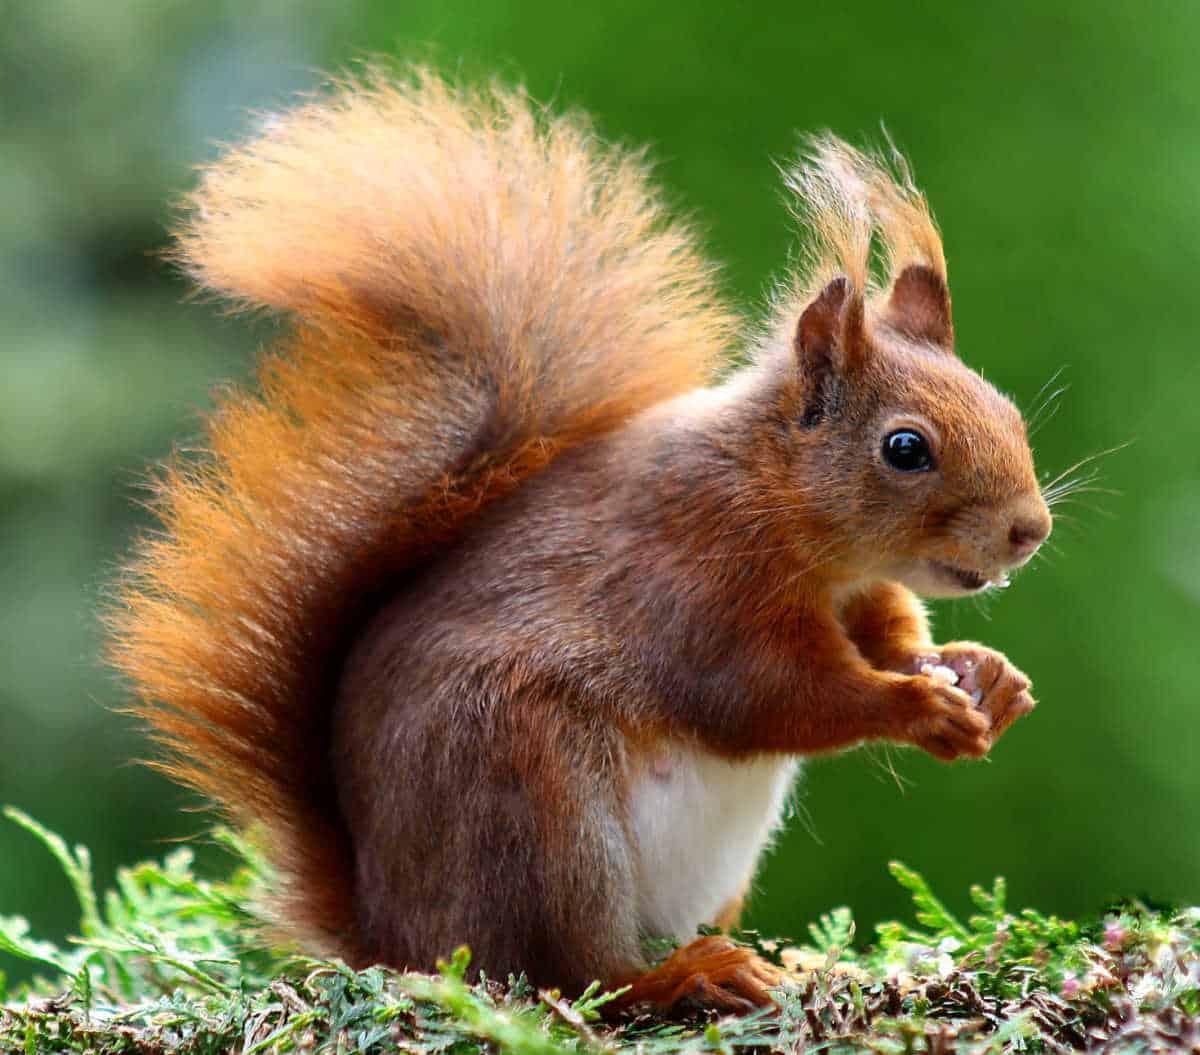 Red squirrel on moss eating a nut